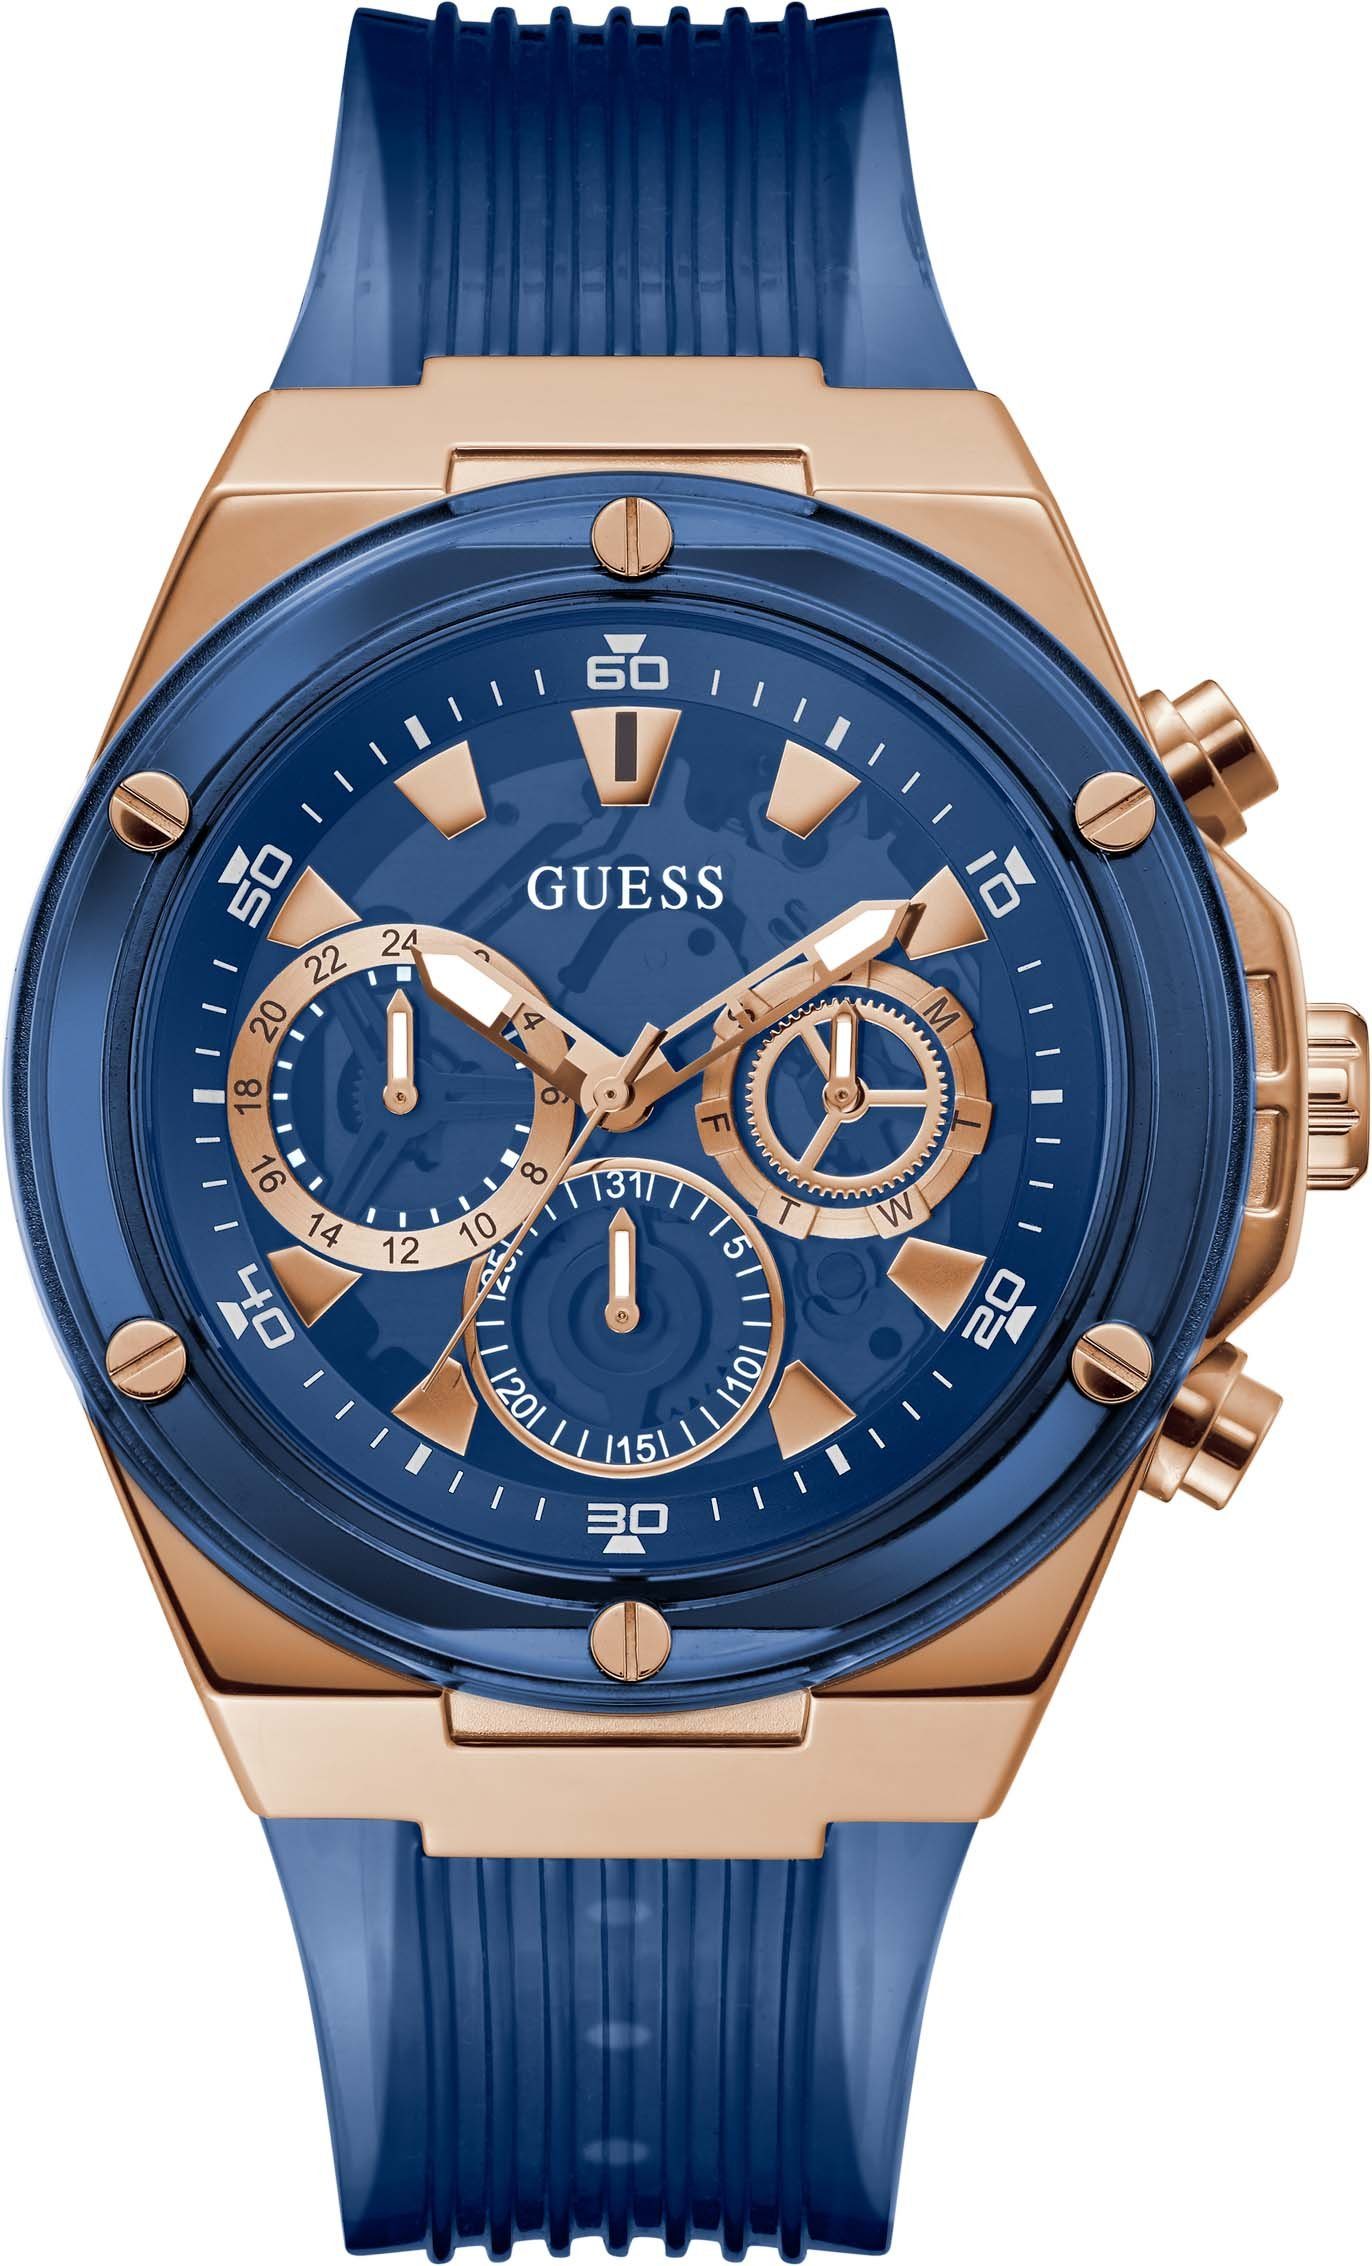 Multifunktionsuhr GW0425G3 Guess